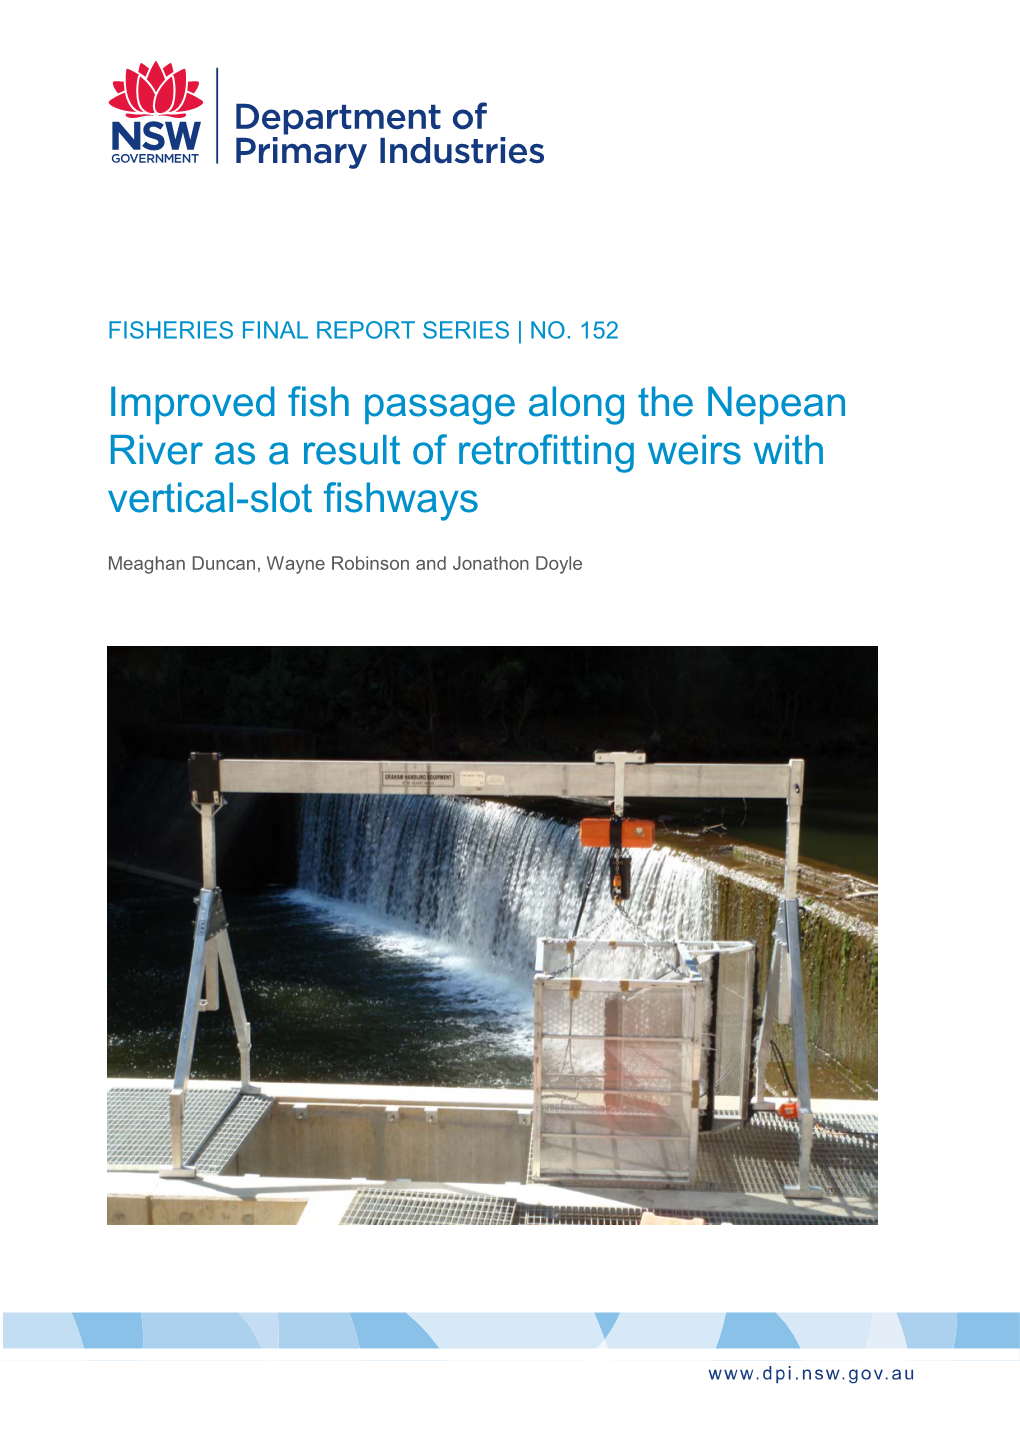 Improved Fish Passage Along the Nepean River As a Result of Retrofitting Weirs with Vertical-Slot Fishways